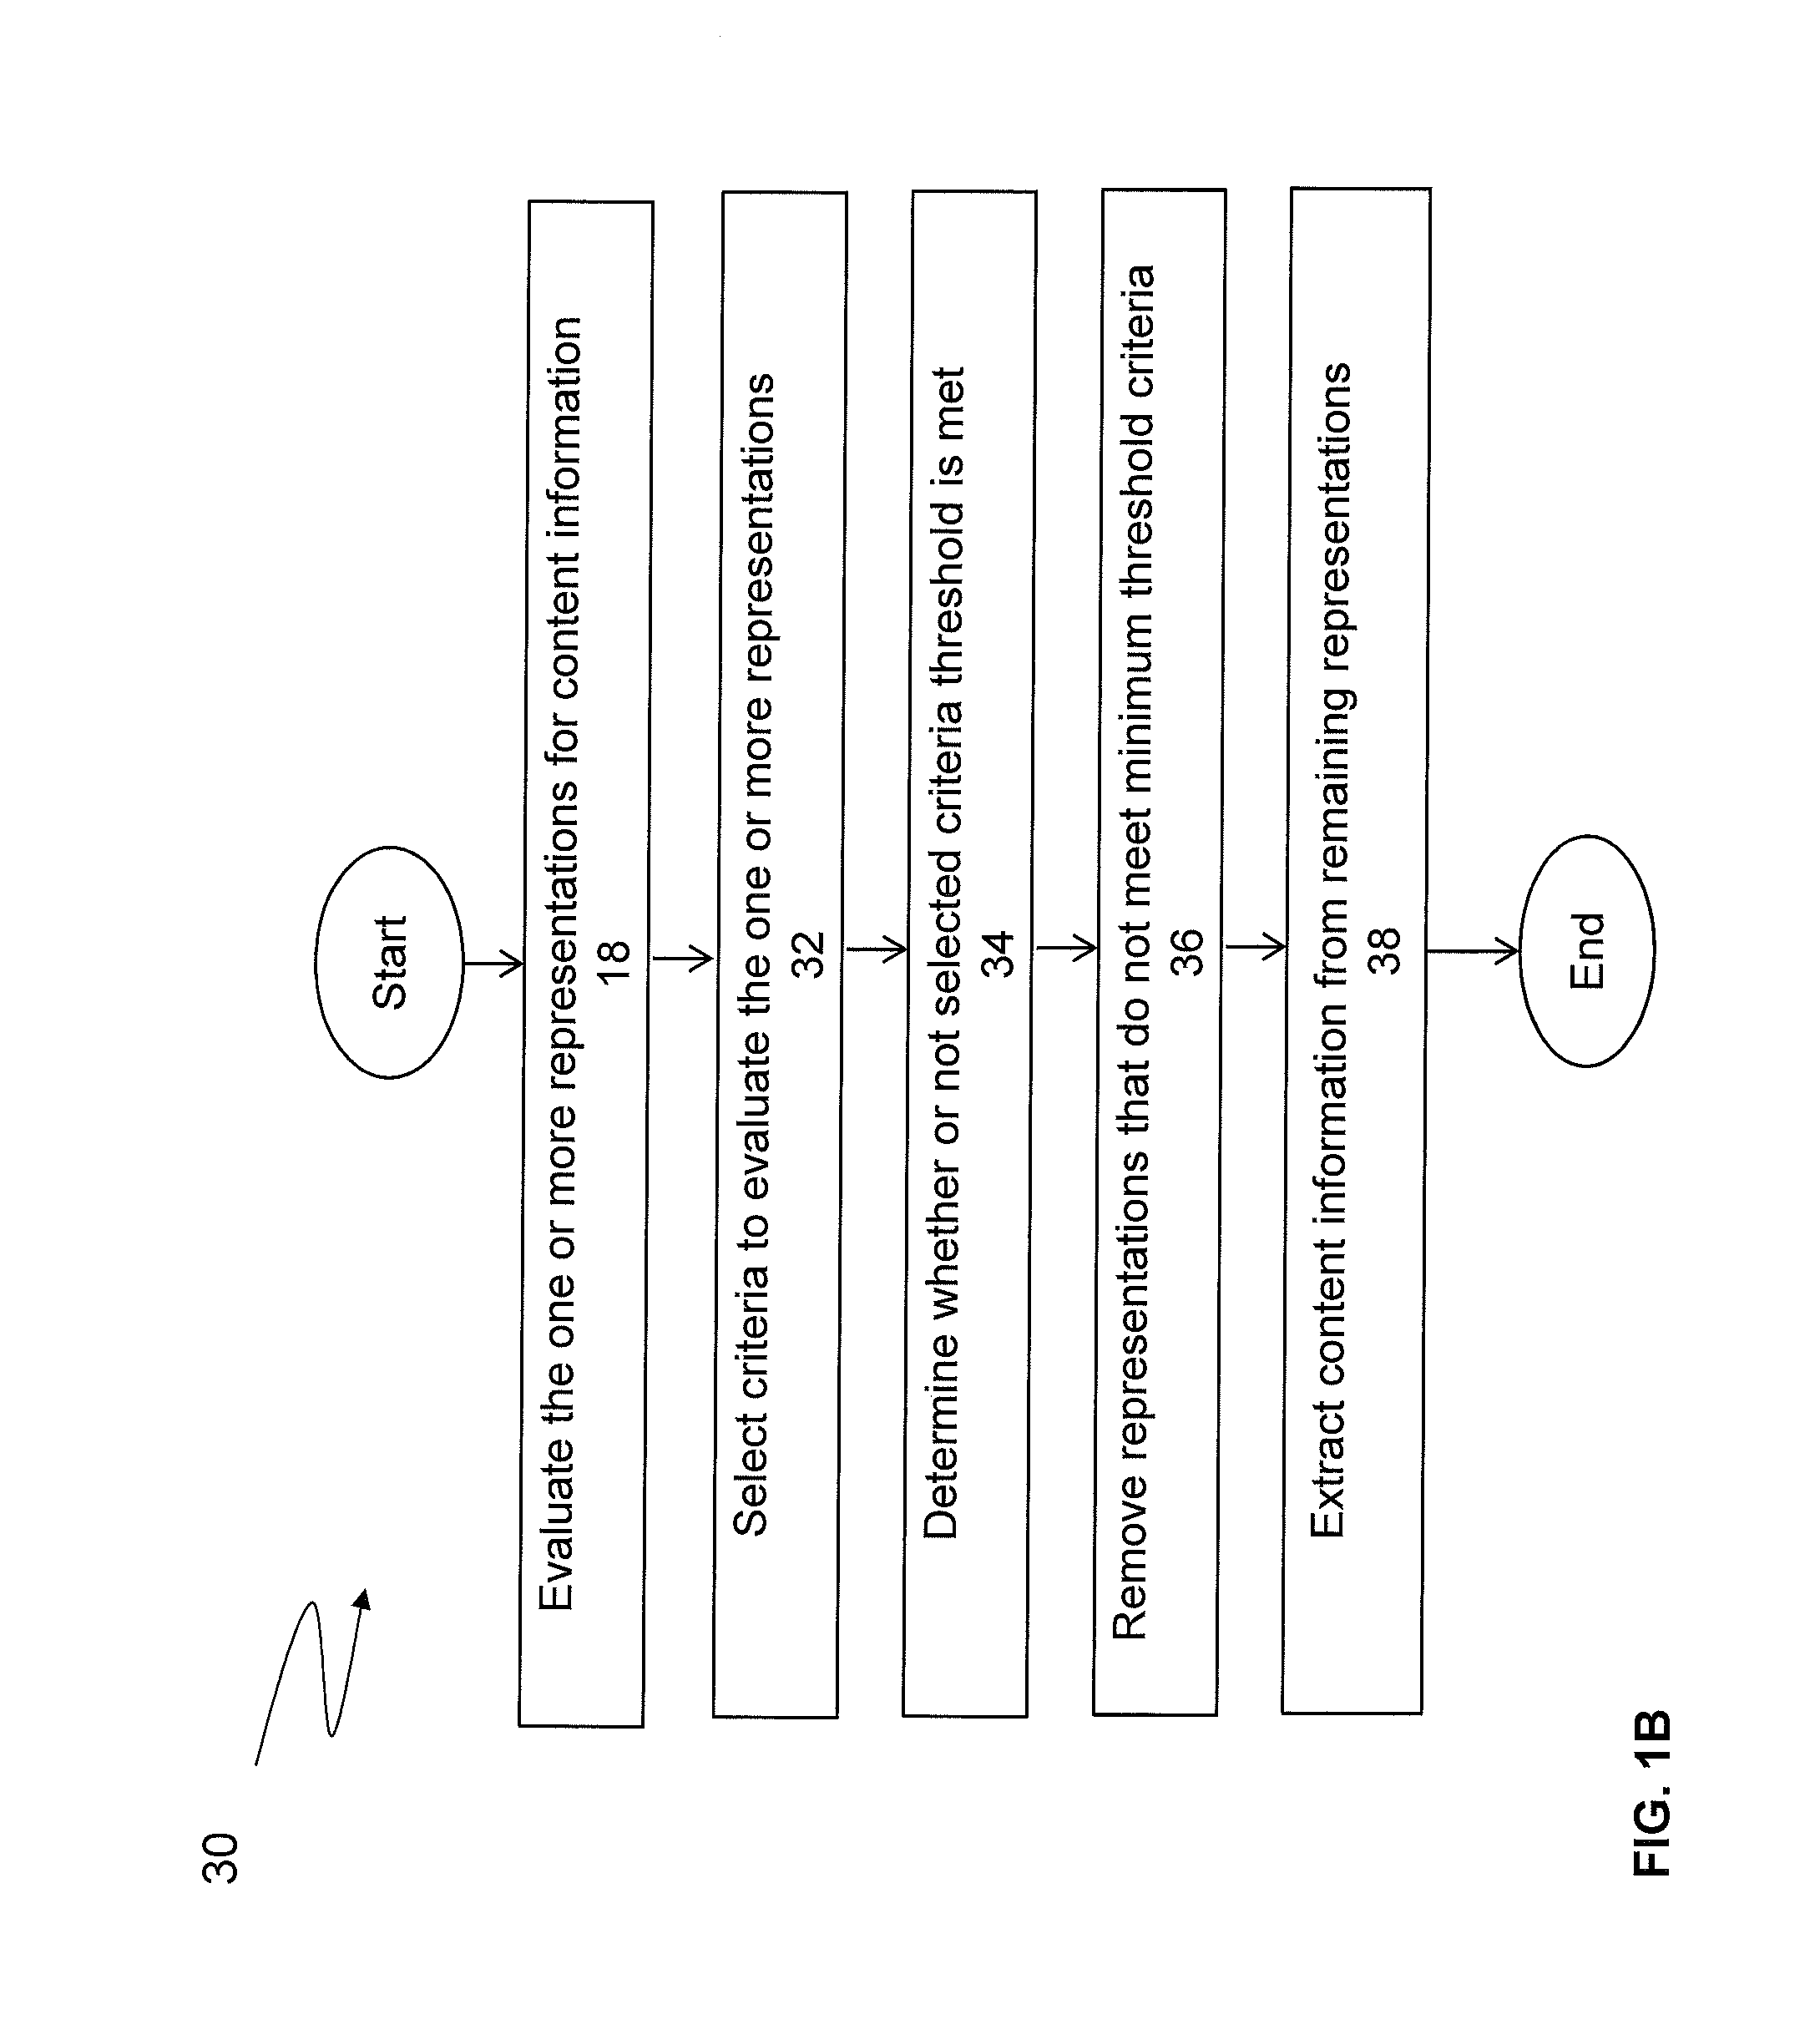 System and methods for generating quality, verified, and synthesized information